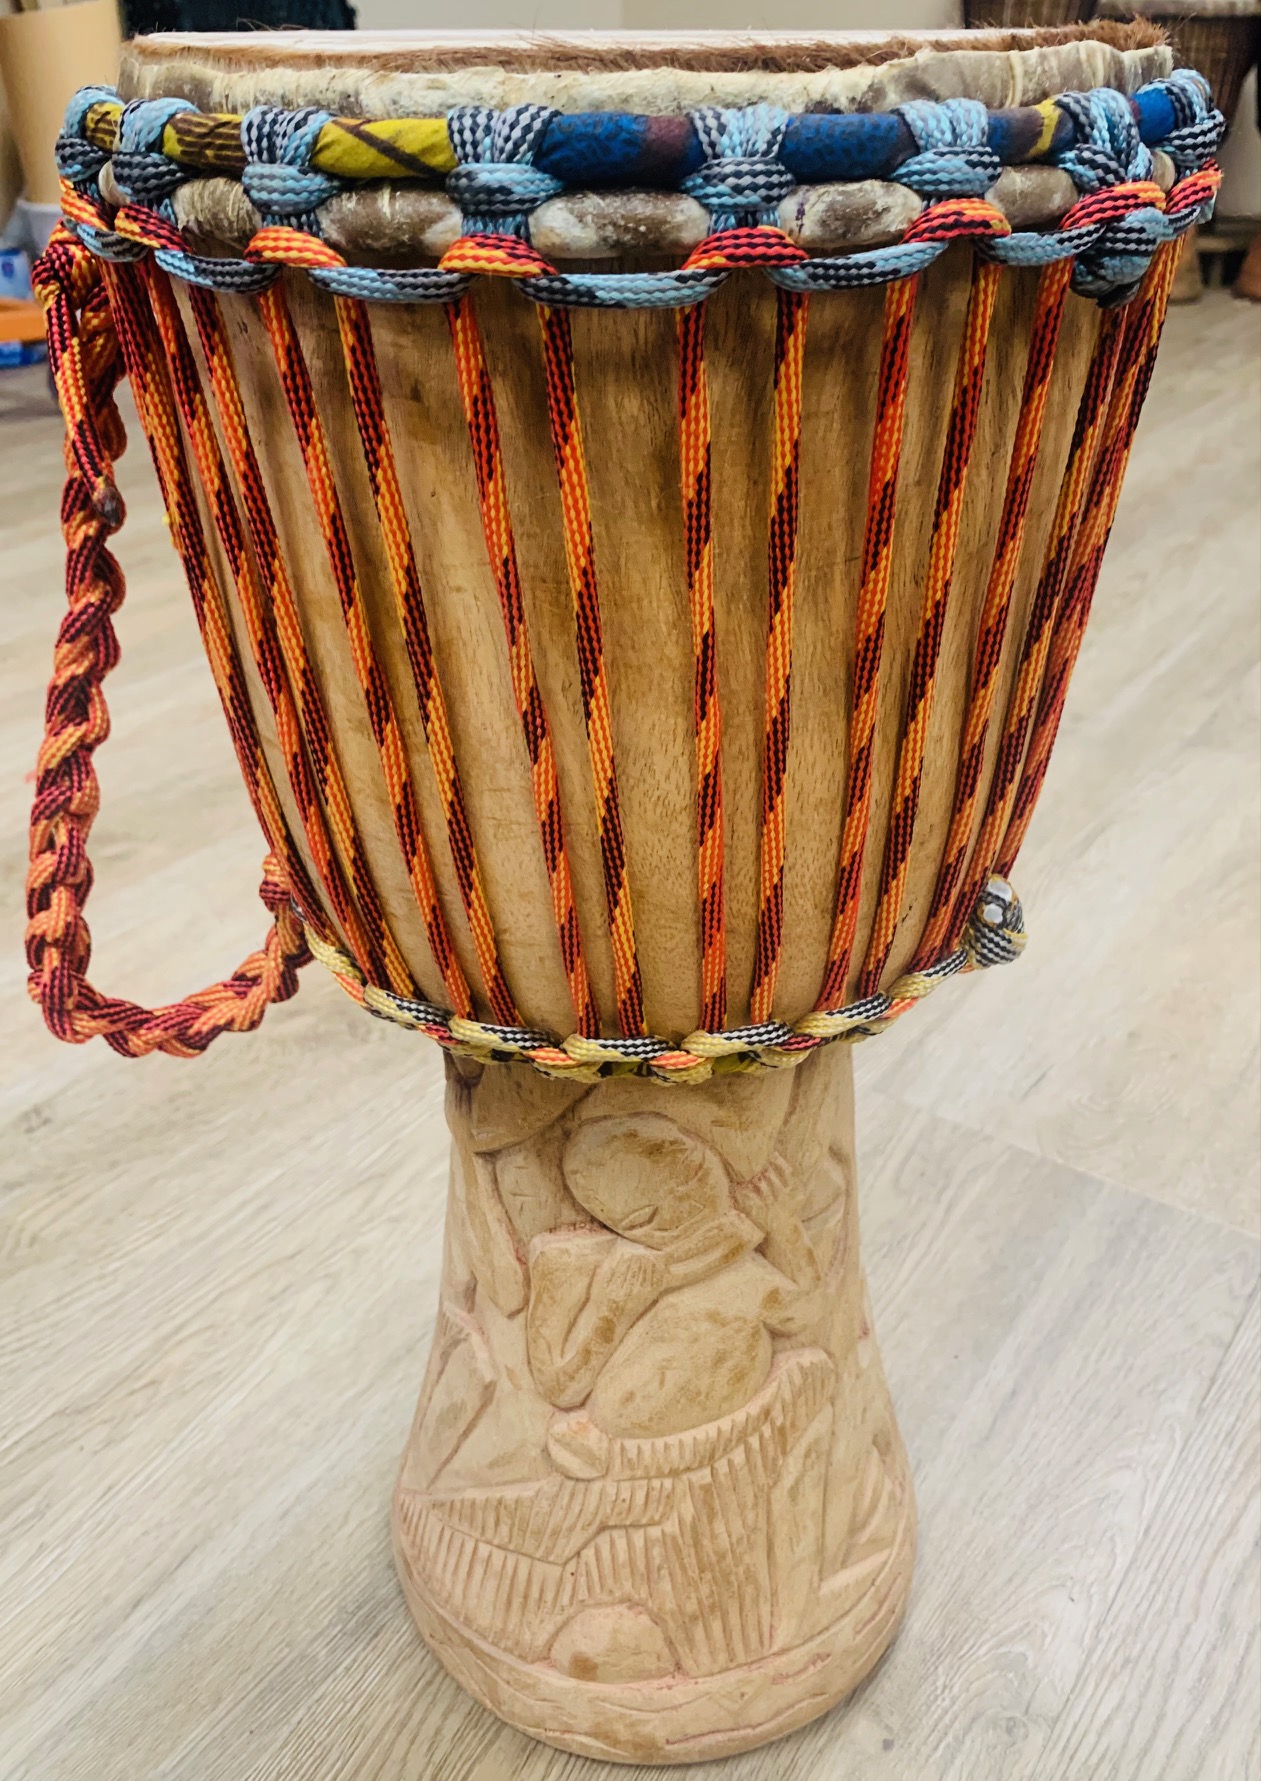 hands playing djembe drums